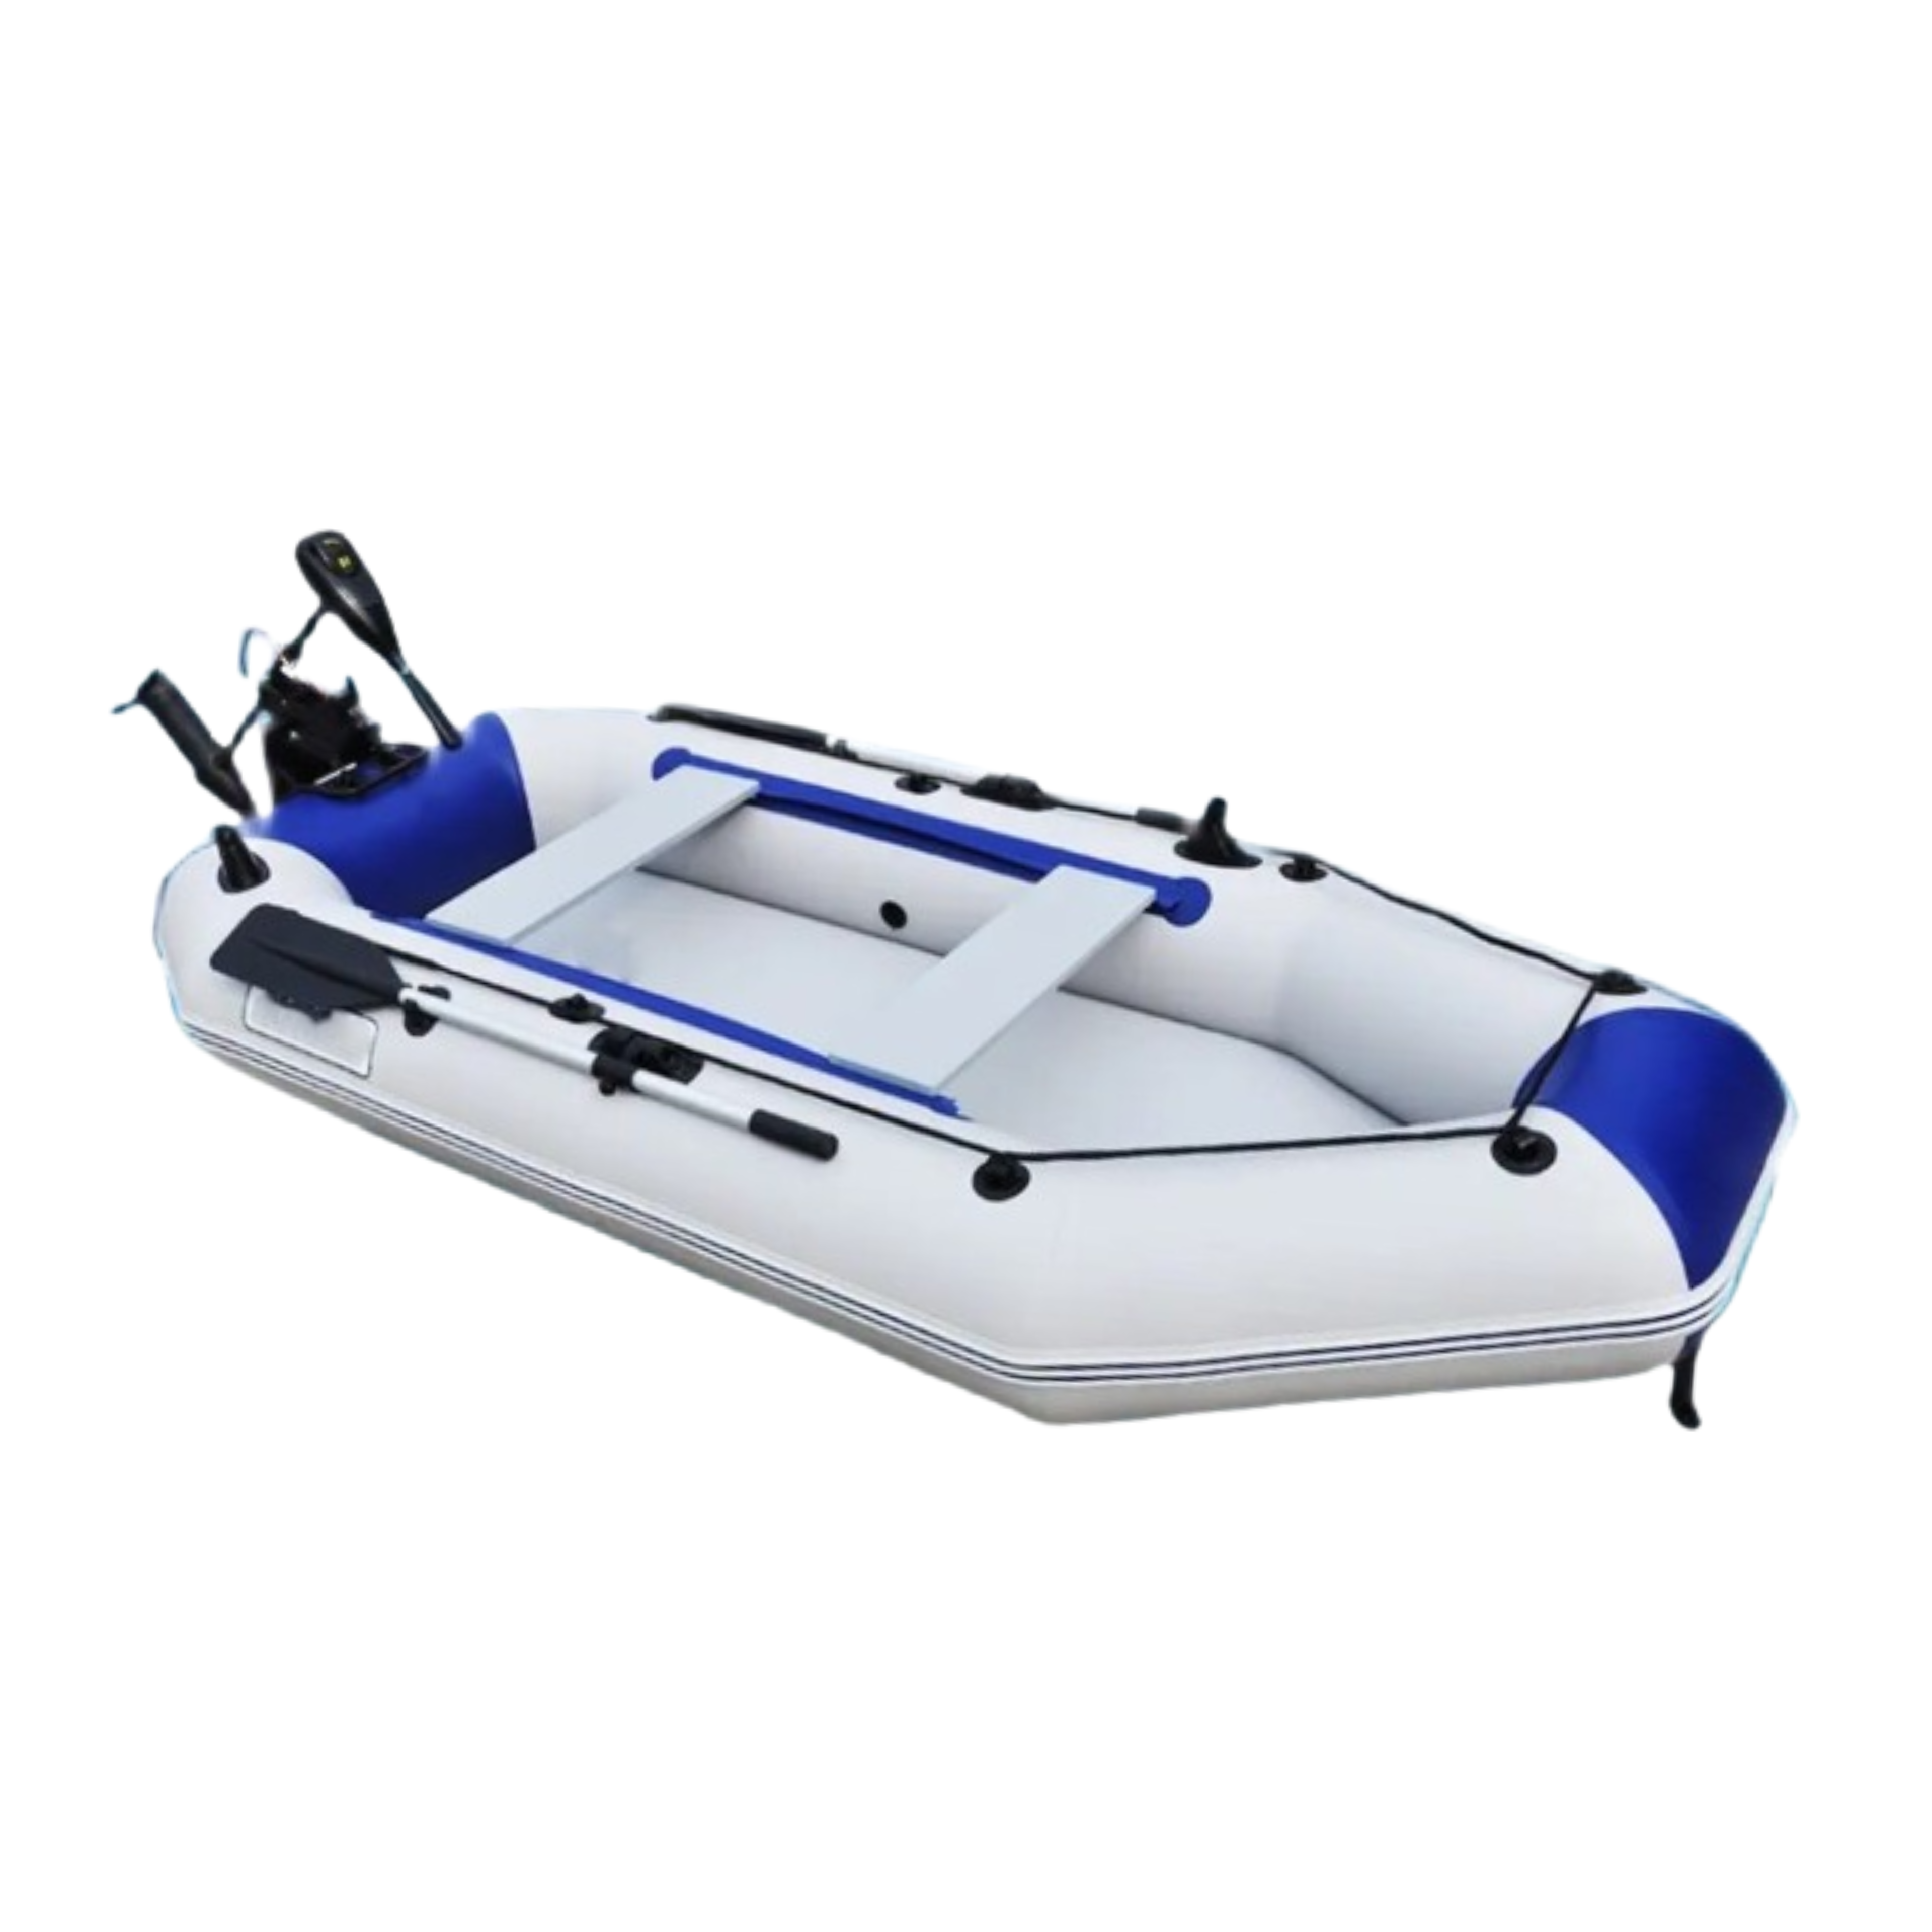 DCV eBoat inflatable